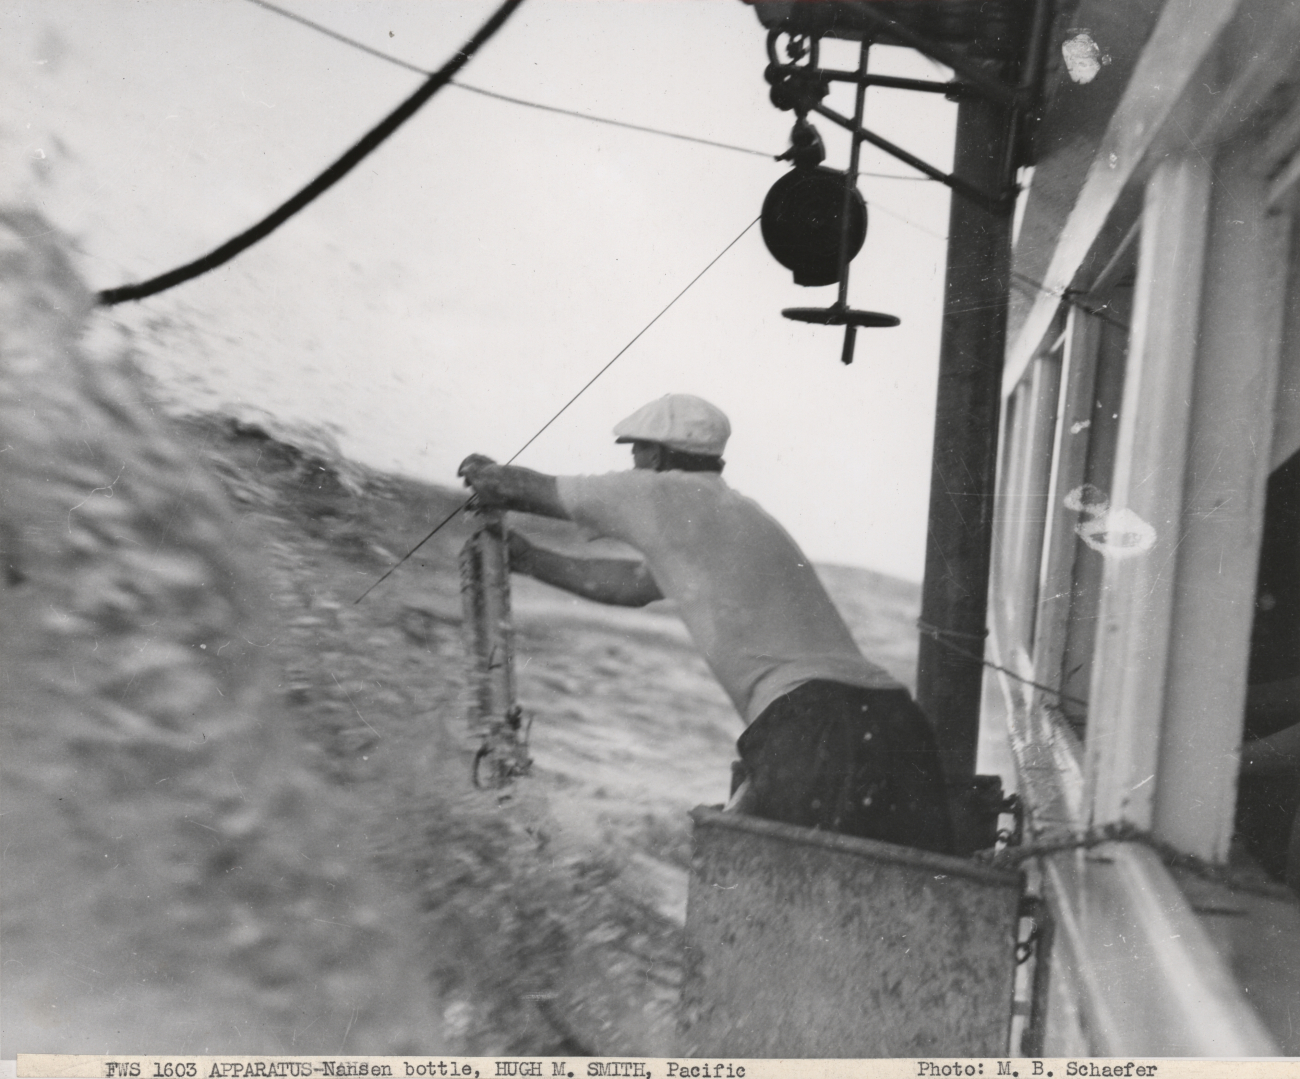 Recovering a Nansen bottle in rough seas on the Fisheries Research VesselHUGH M